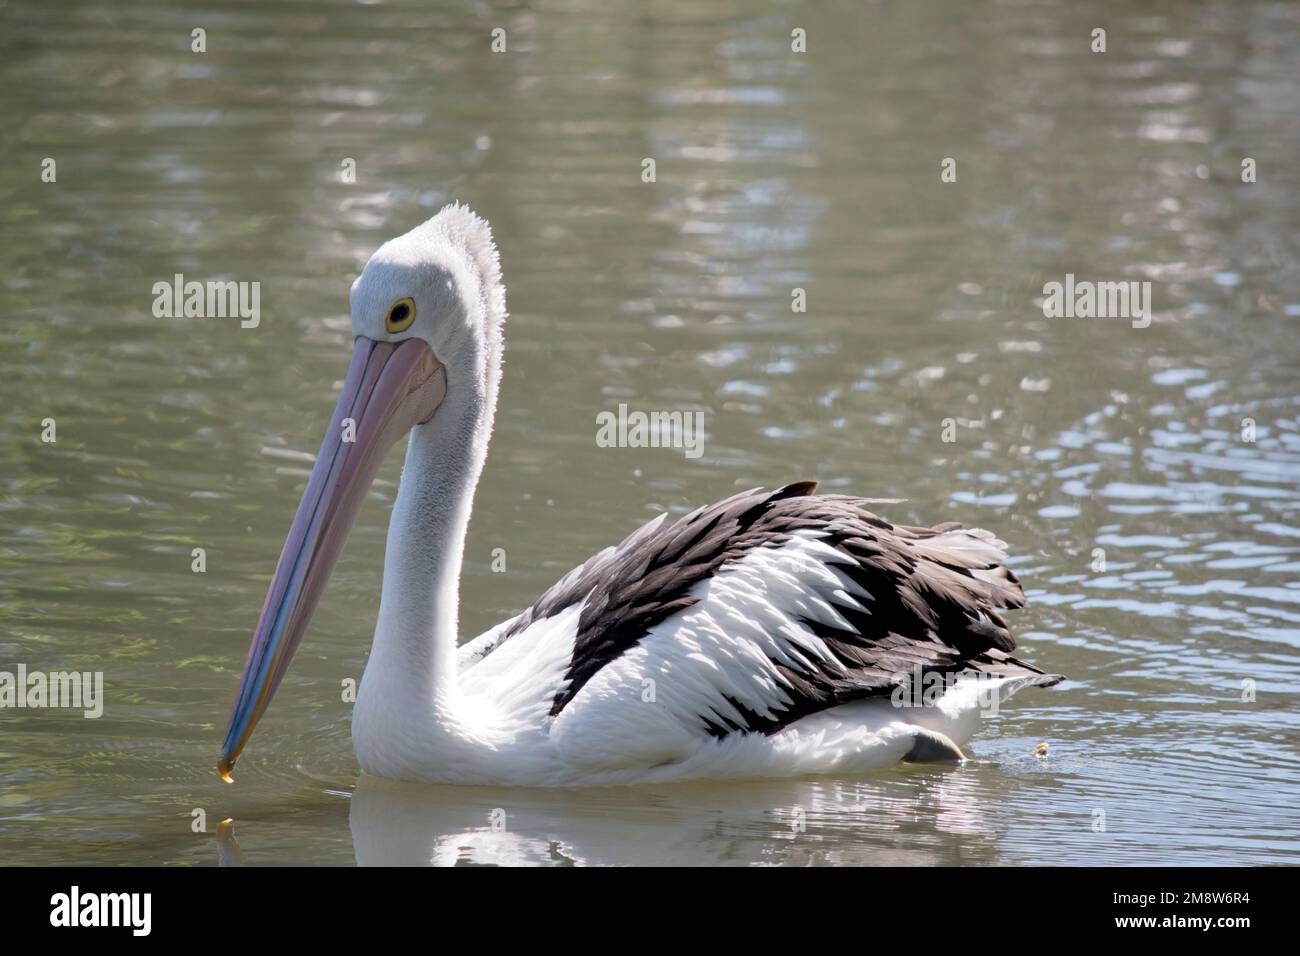 the Australian pelican is black and white seabird with a large pink bill Stock Photo